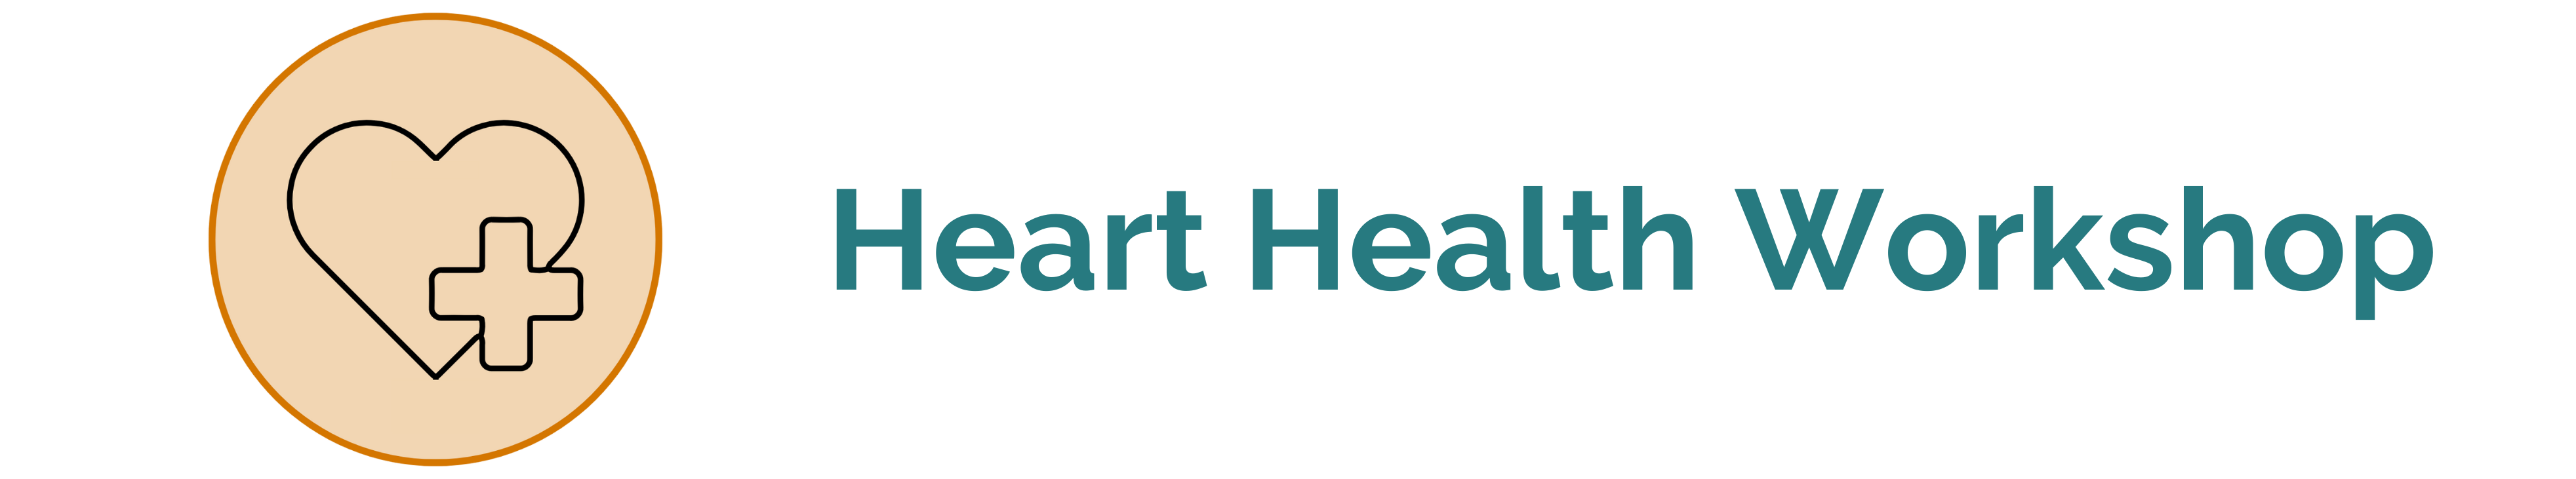 Icon and title for Heart Health workshop